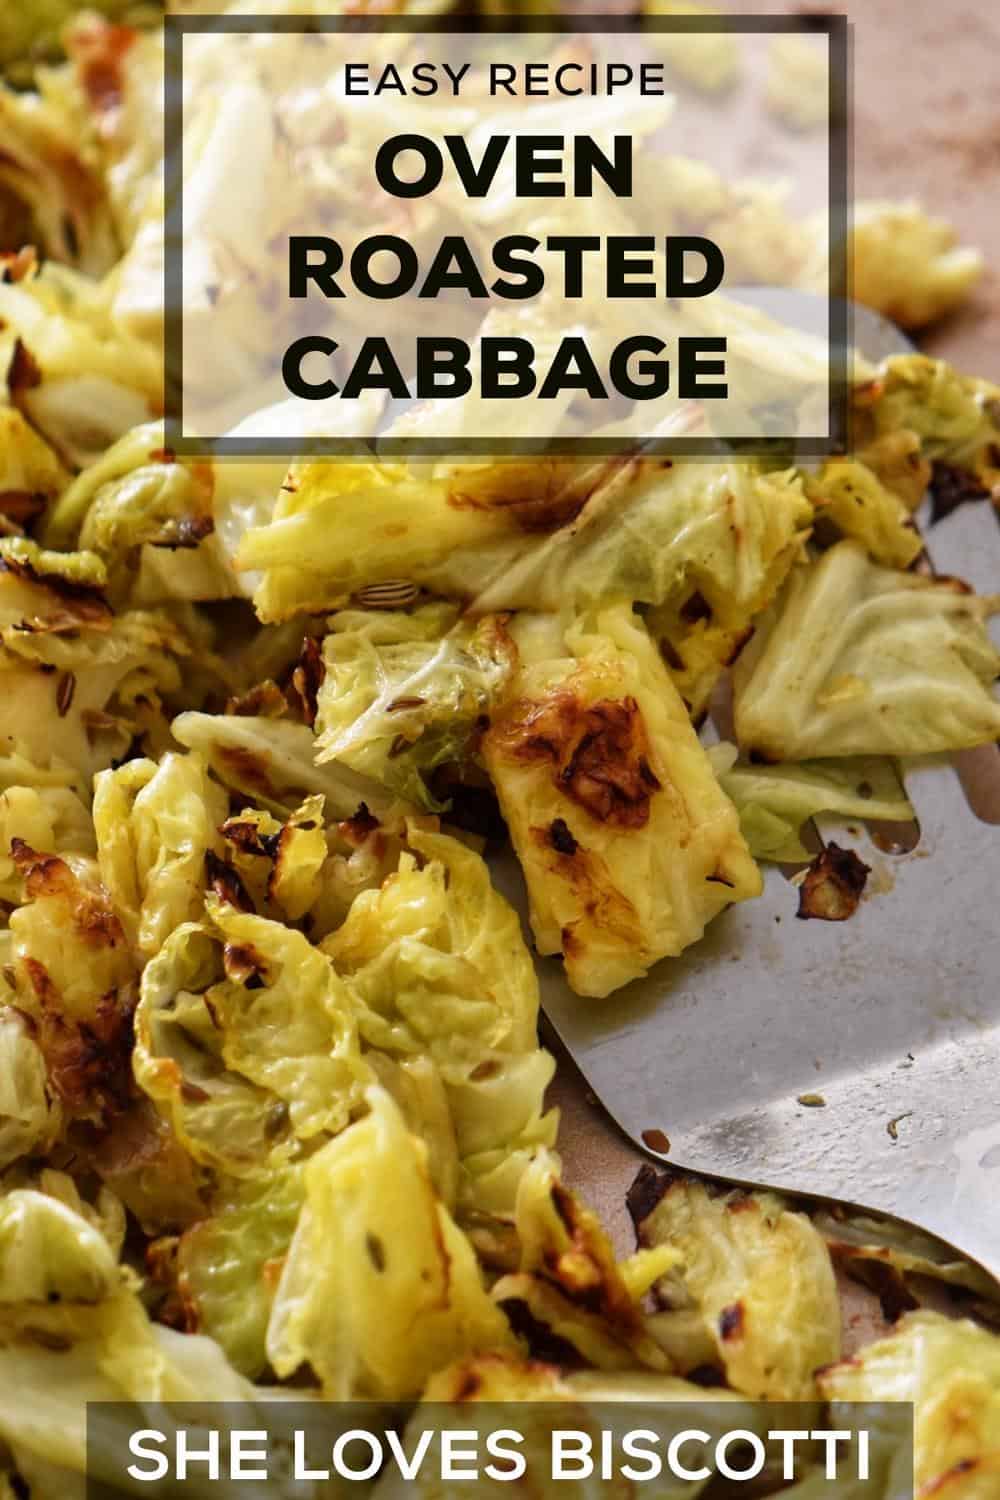 Oven Roasted Cabbage Recipe with Fennel Seeds - She Loves Biscotti